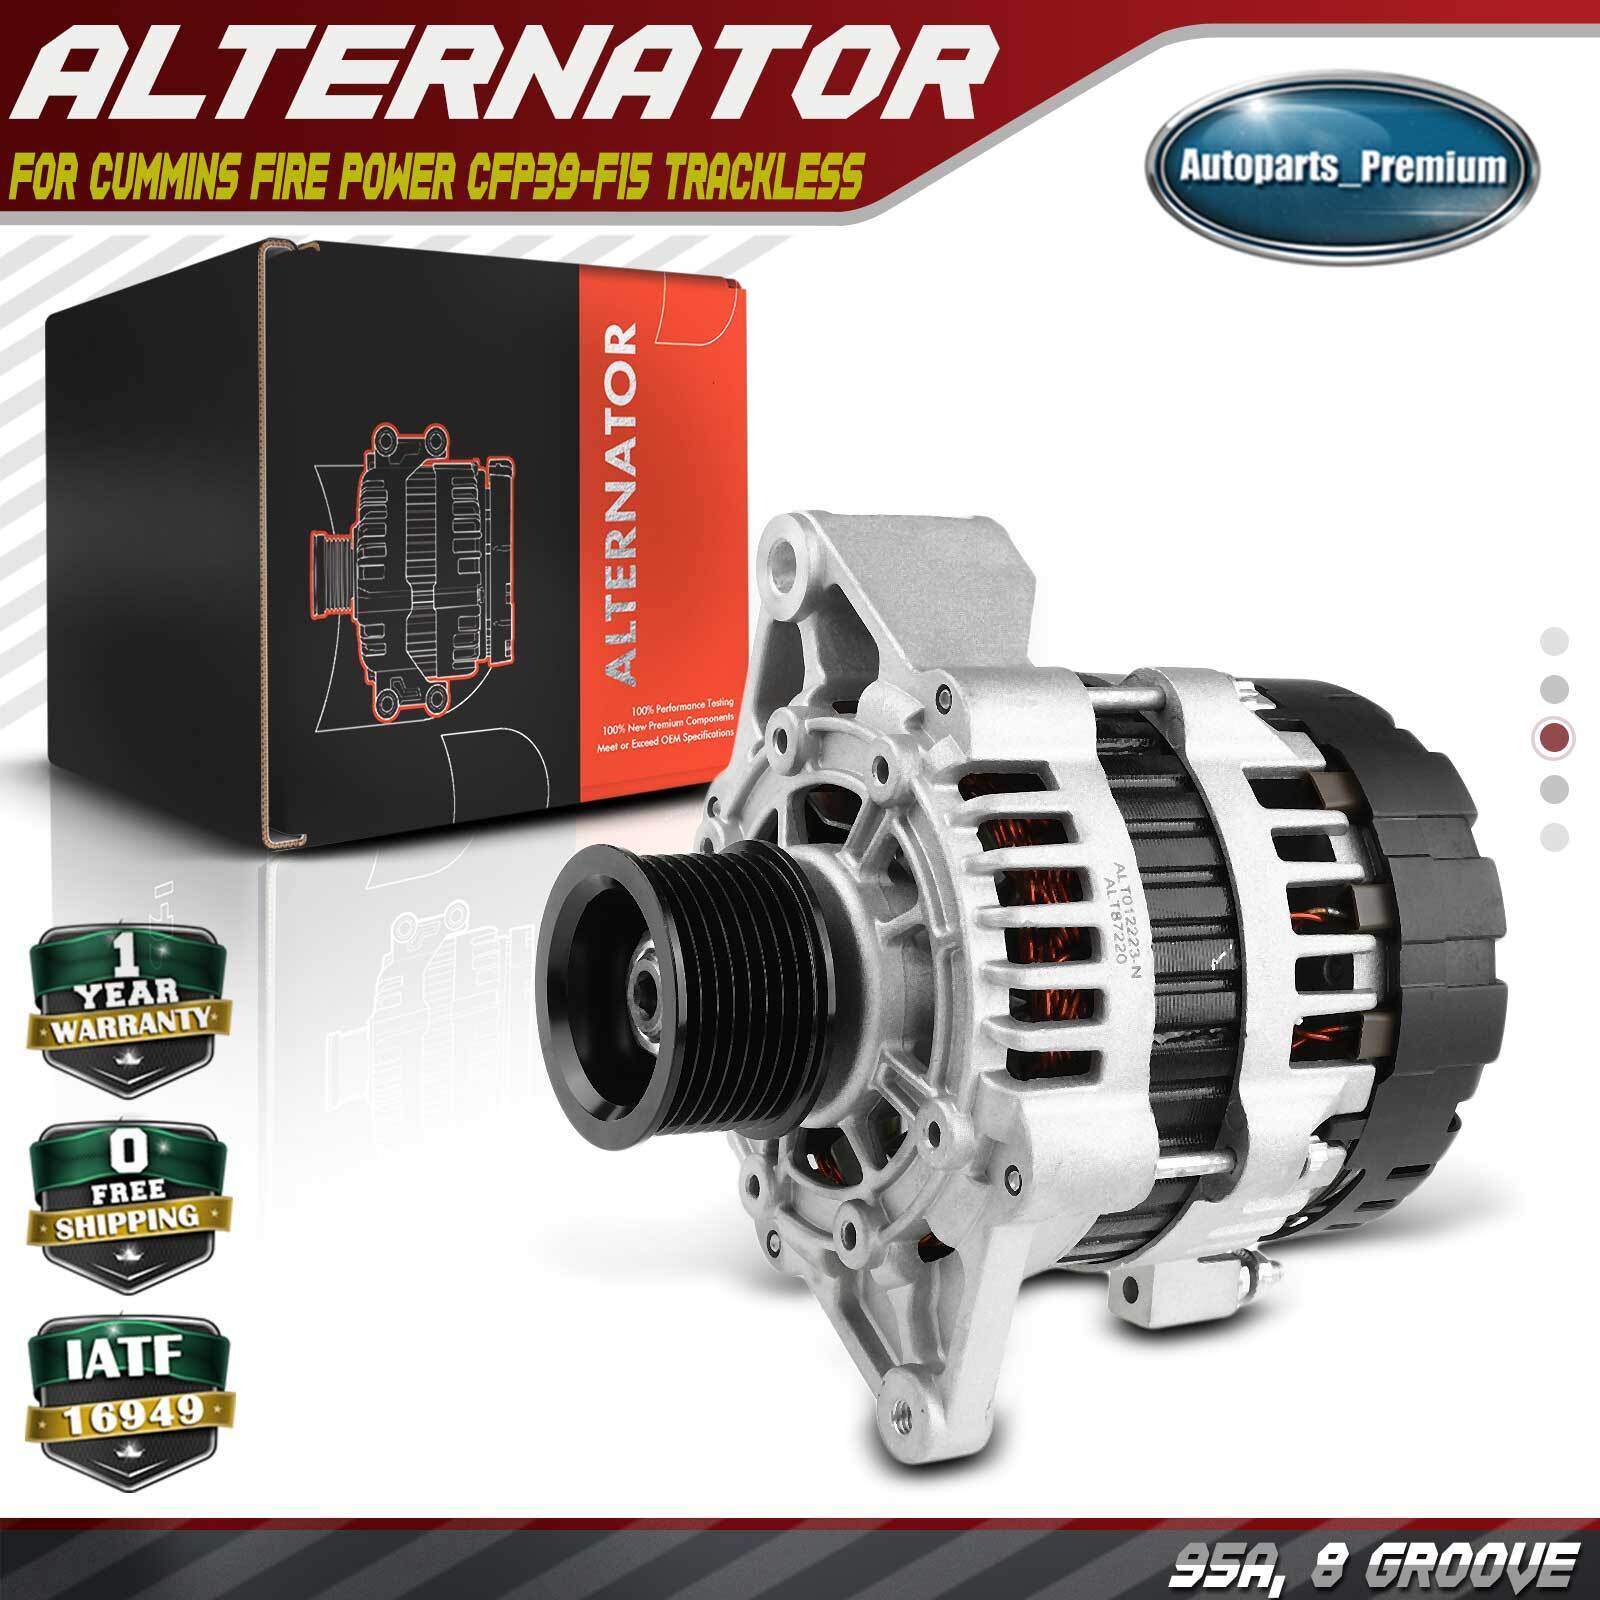 Alternator for Cummins Fire Power CFP39-F15 Trackless 95A 12V CW 8-Groove Pulley